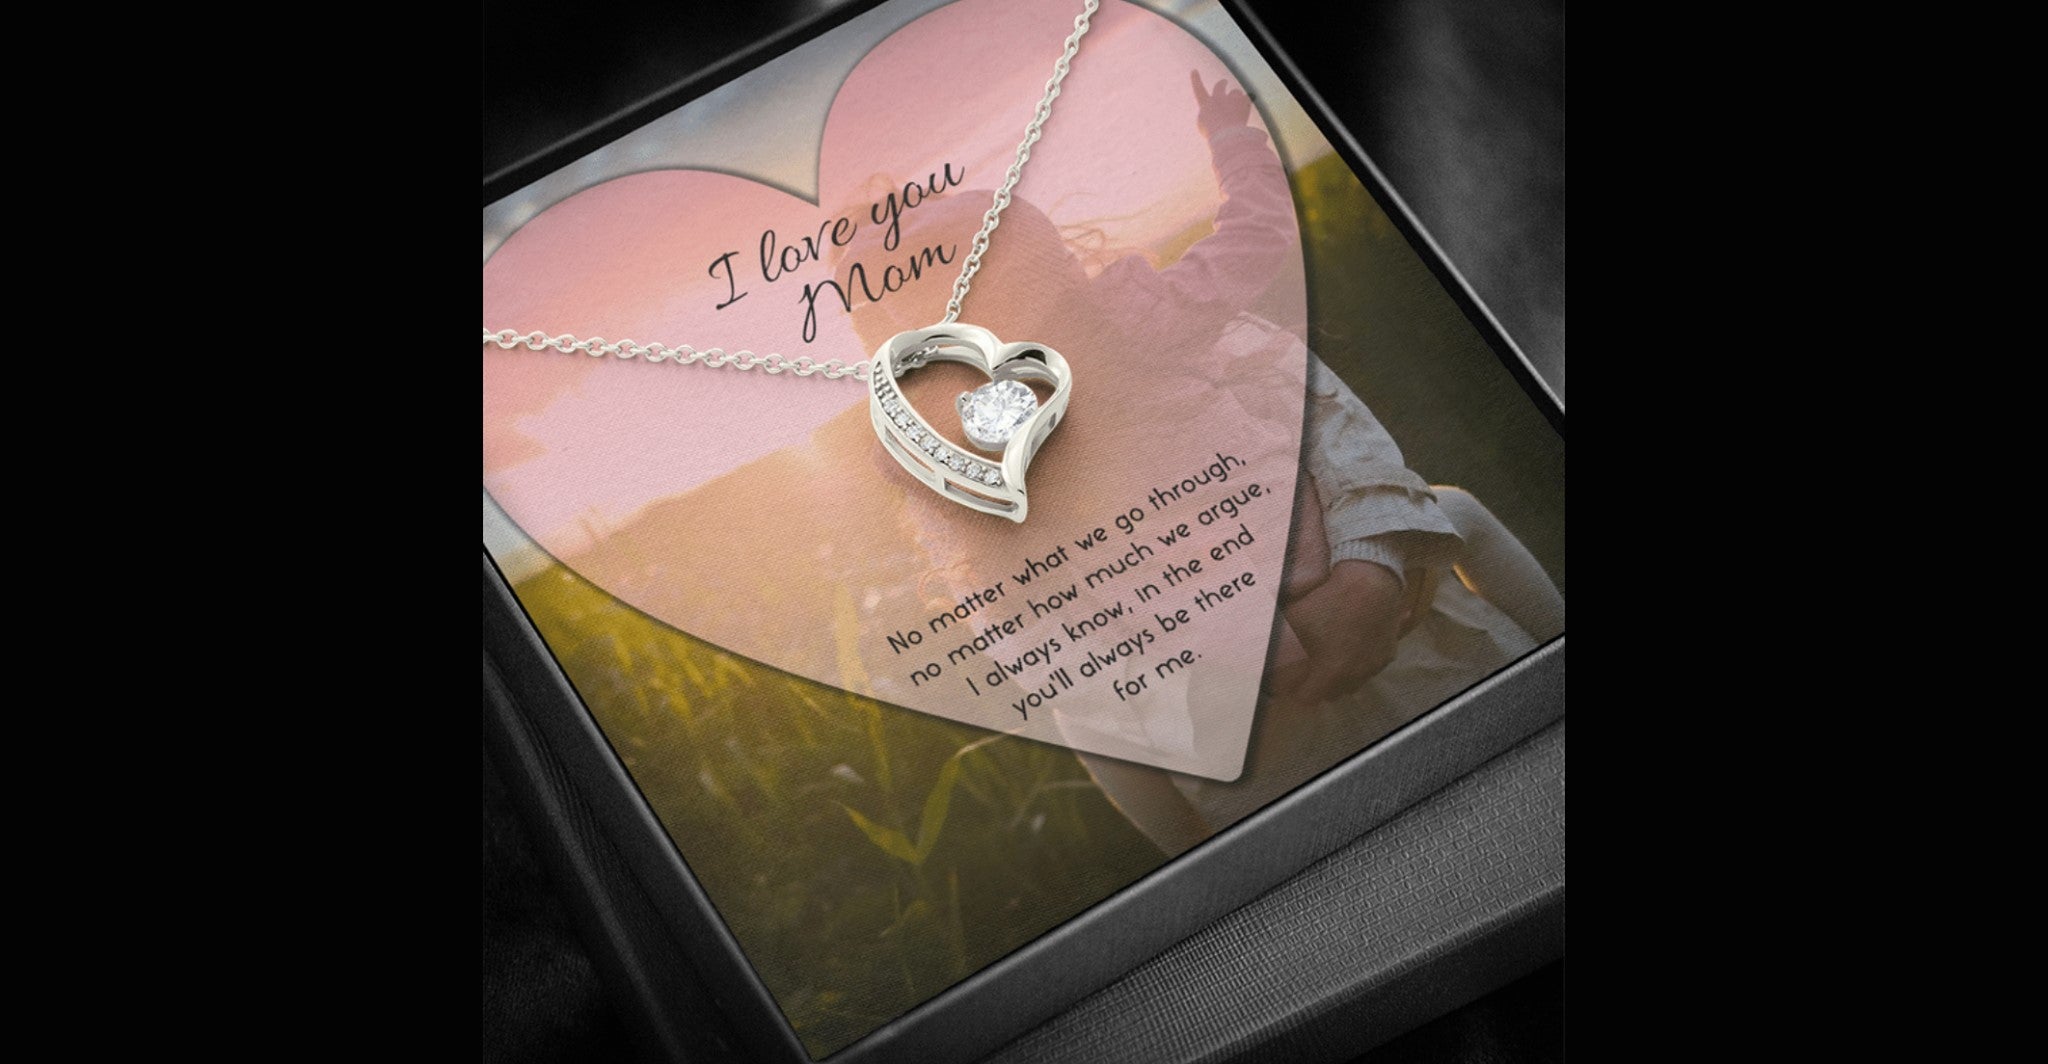 I Love You Mom No Matter What We Go Through, Necklace With Message Card, Mother's Day Gift For Mom, Best Mother’s Day Gift Ideas			 1617090070584.jpg